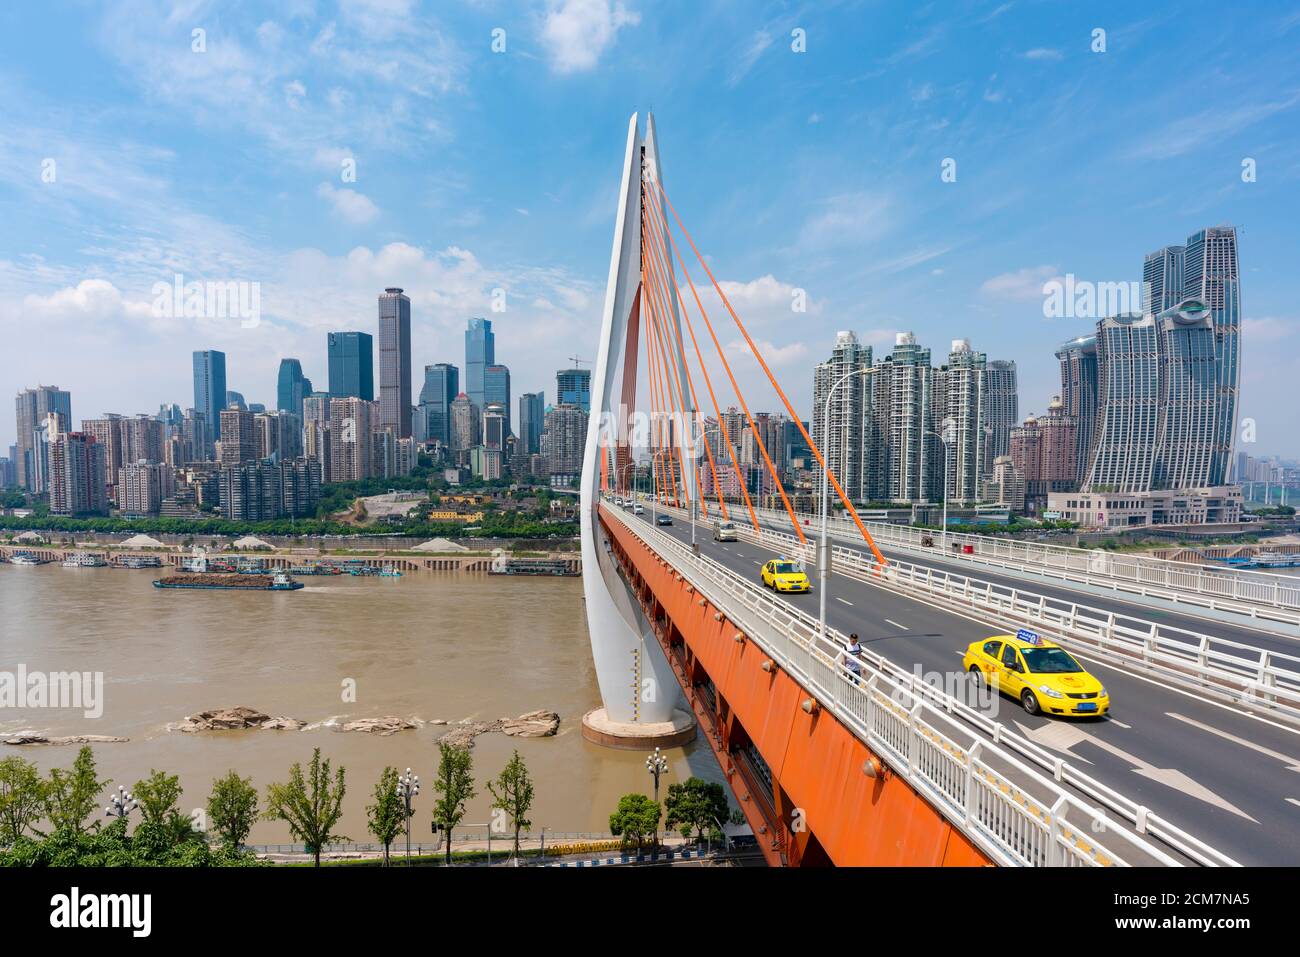 Downtown disctrict of Chongqing city in China Stock Photo